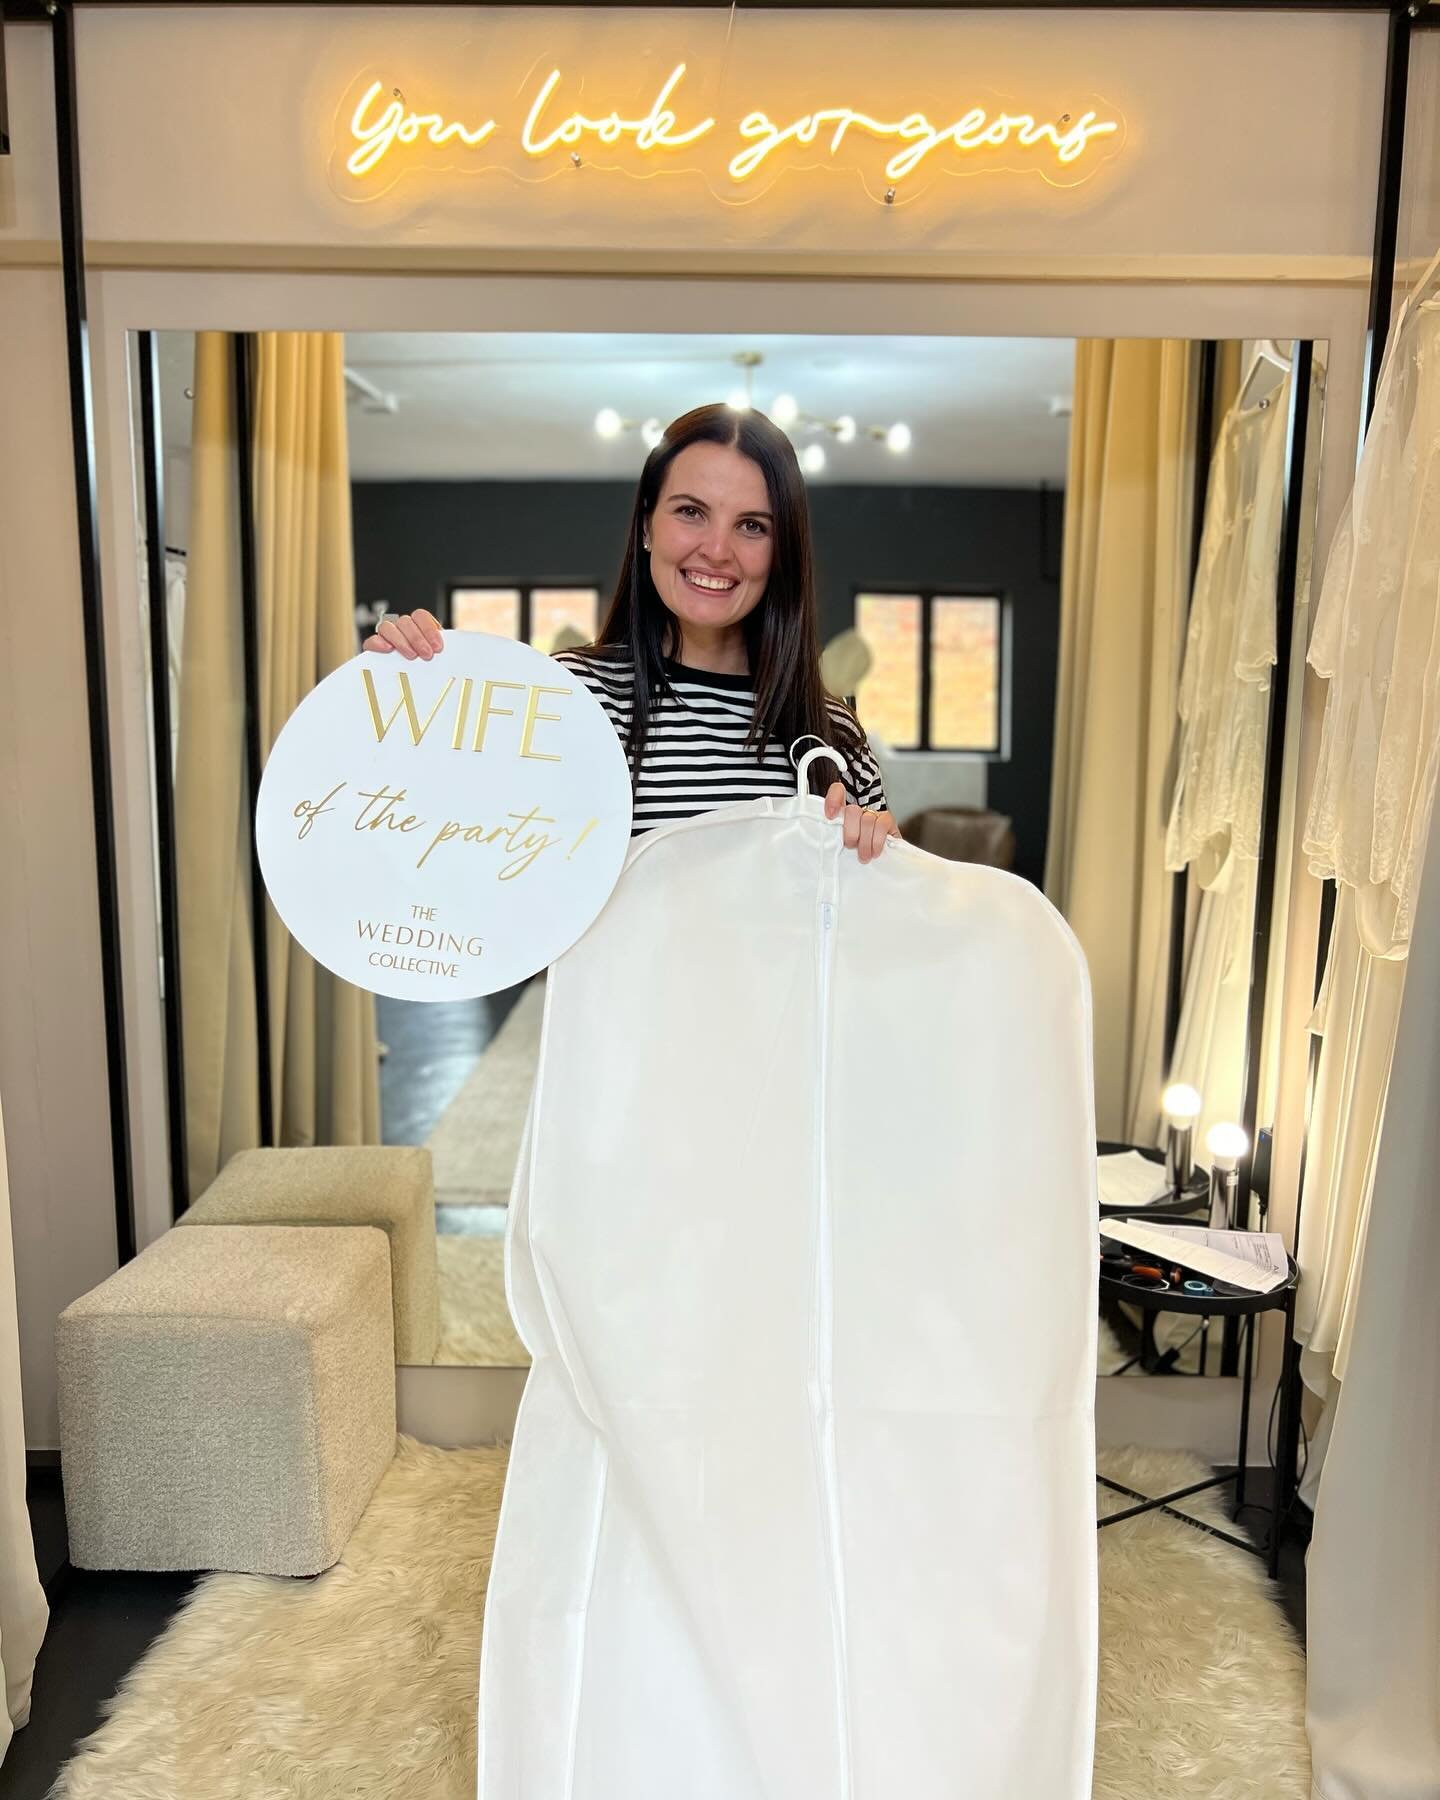 It&rsquo;s our incredible #TWCrealbride Chrisna&rsquo;s wedding day today! Chrisna, what a blessing you are to the world. Your bubbly personality and excitement about your wedding dress was so amazing to witness. You brought so much joy to our studio